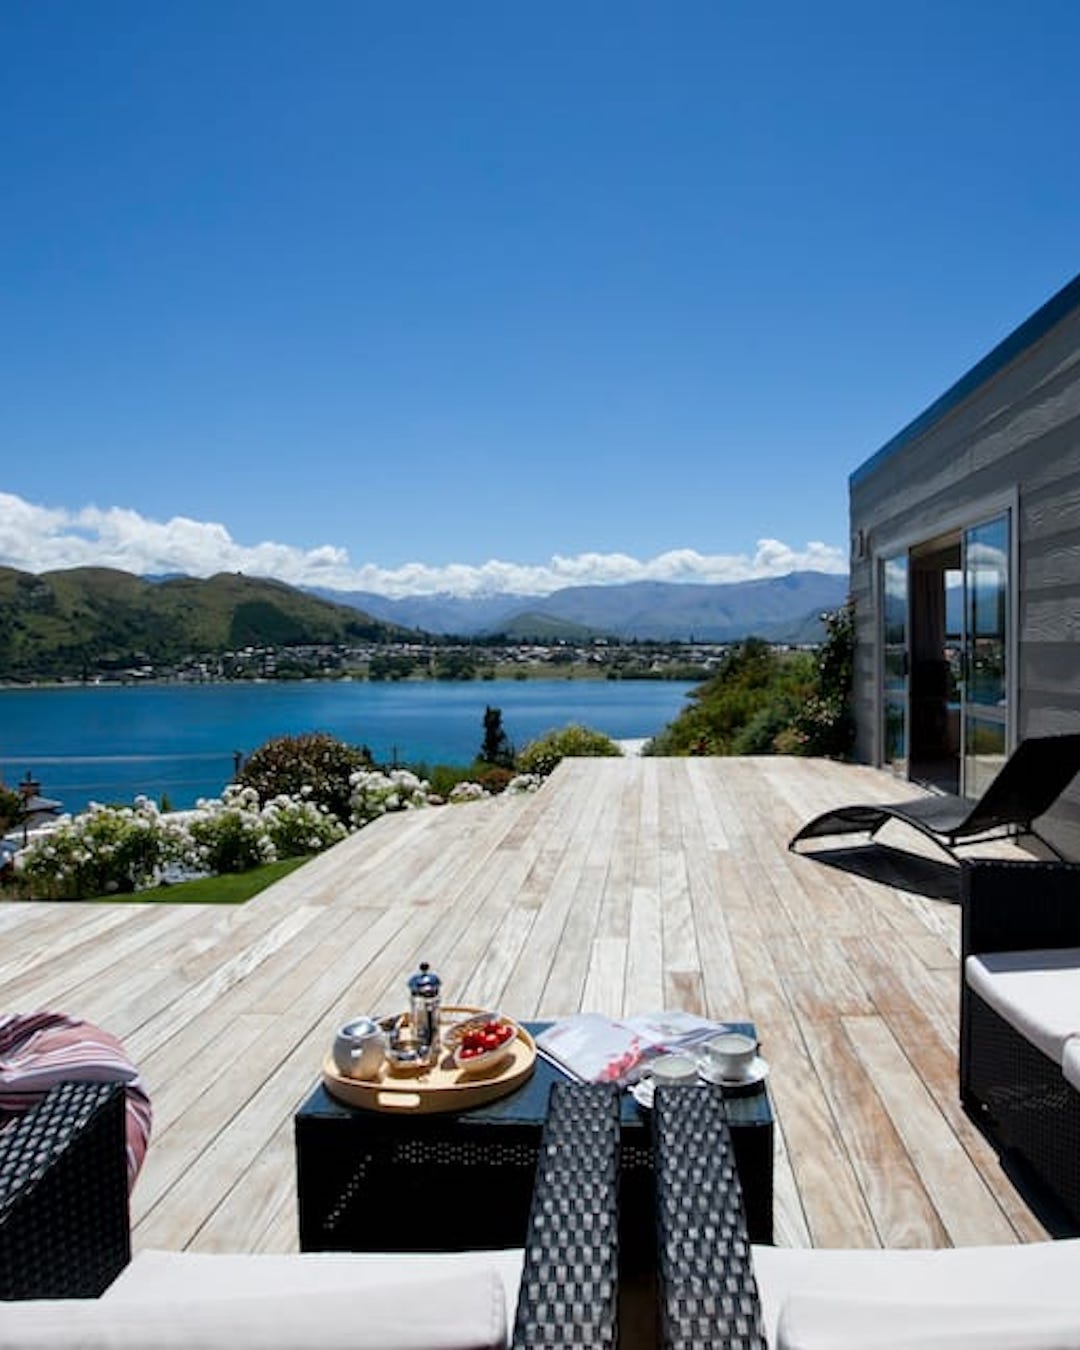 A large veranda overlooking the lake and mountains in Queenstown